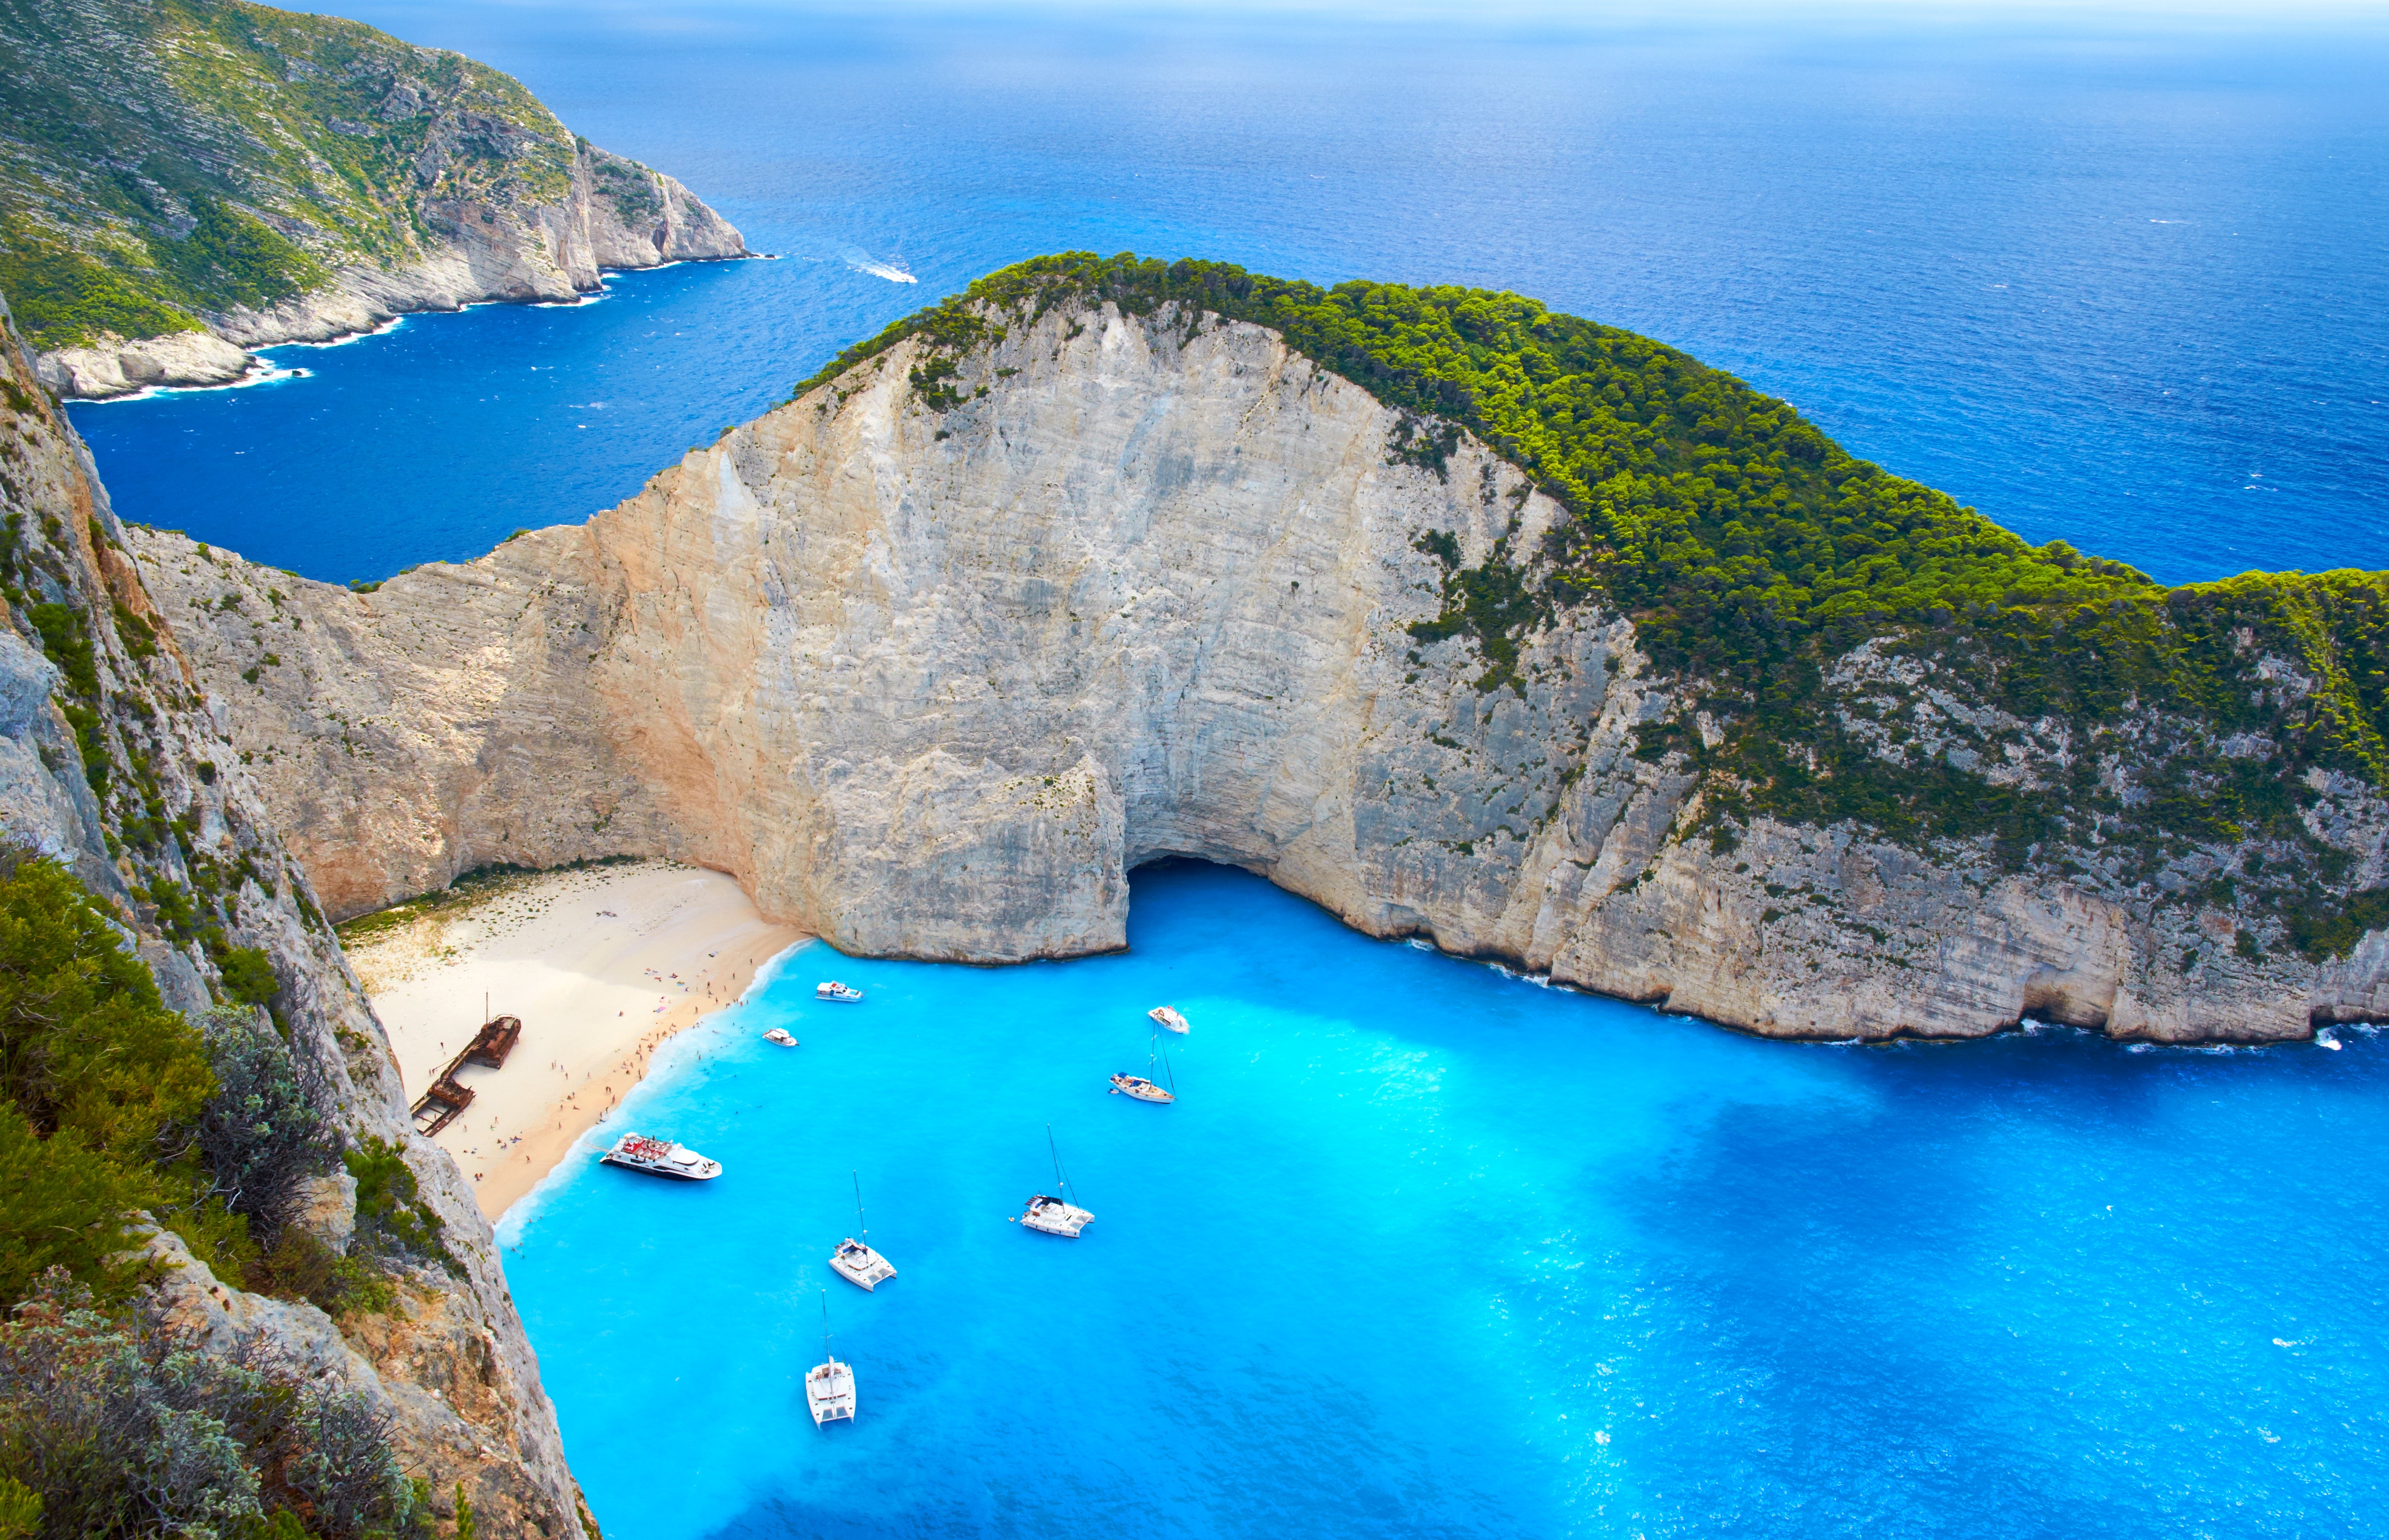 Navagio, or ‘Shipwreck Beach’, in Zakynthos features the wreck of the Panagiotis ship